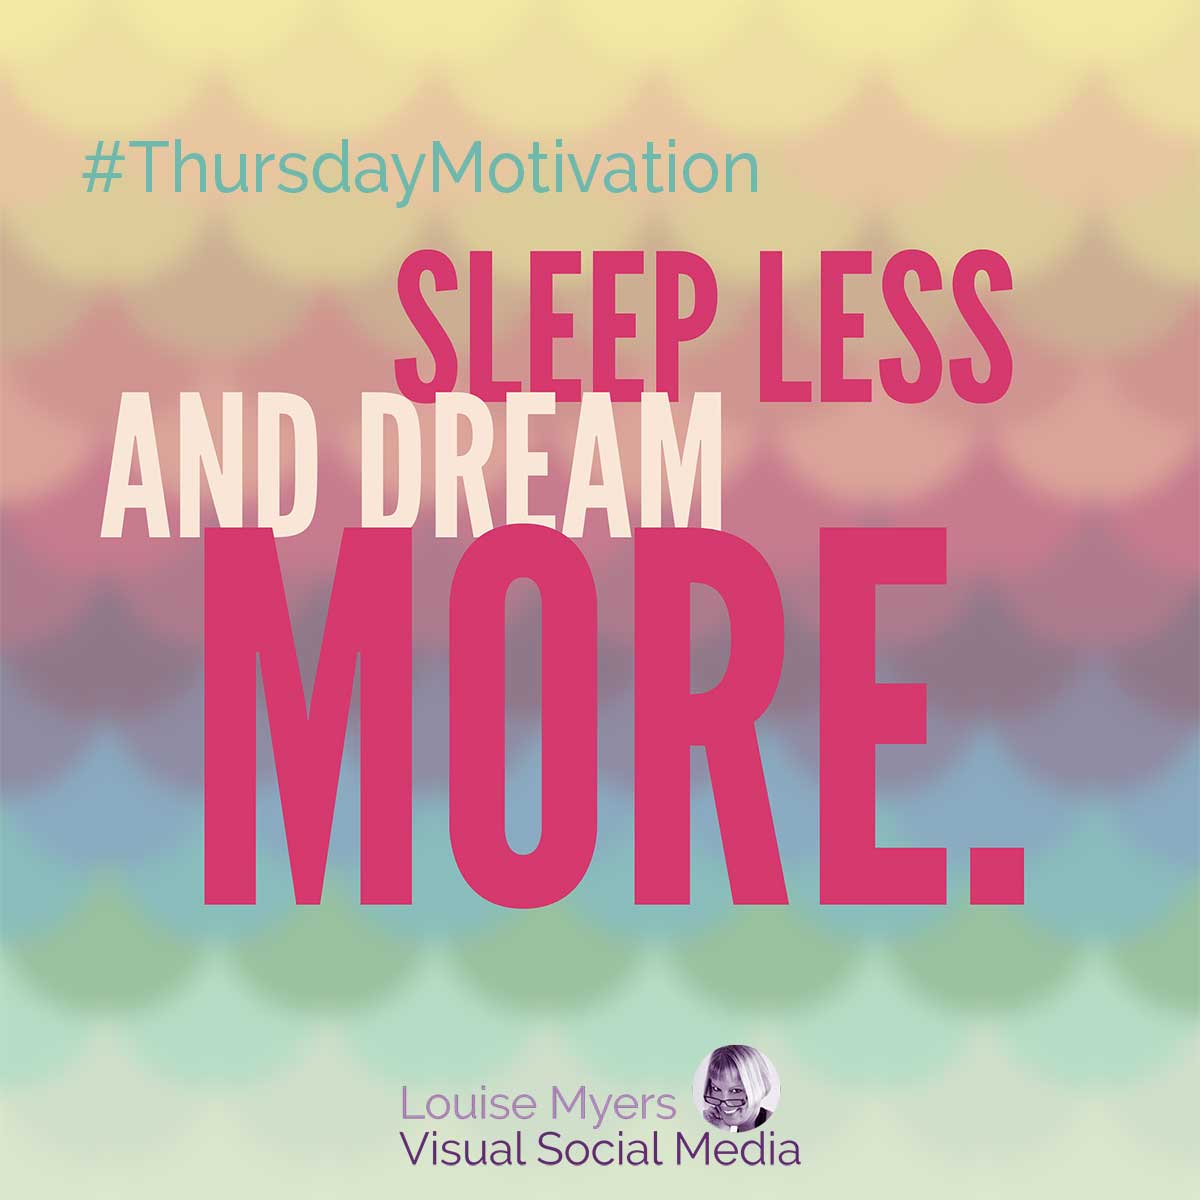 rainbow colors with text sleep less dream more and thursday motivation hashtag.